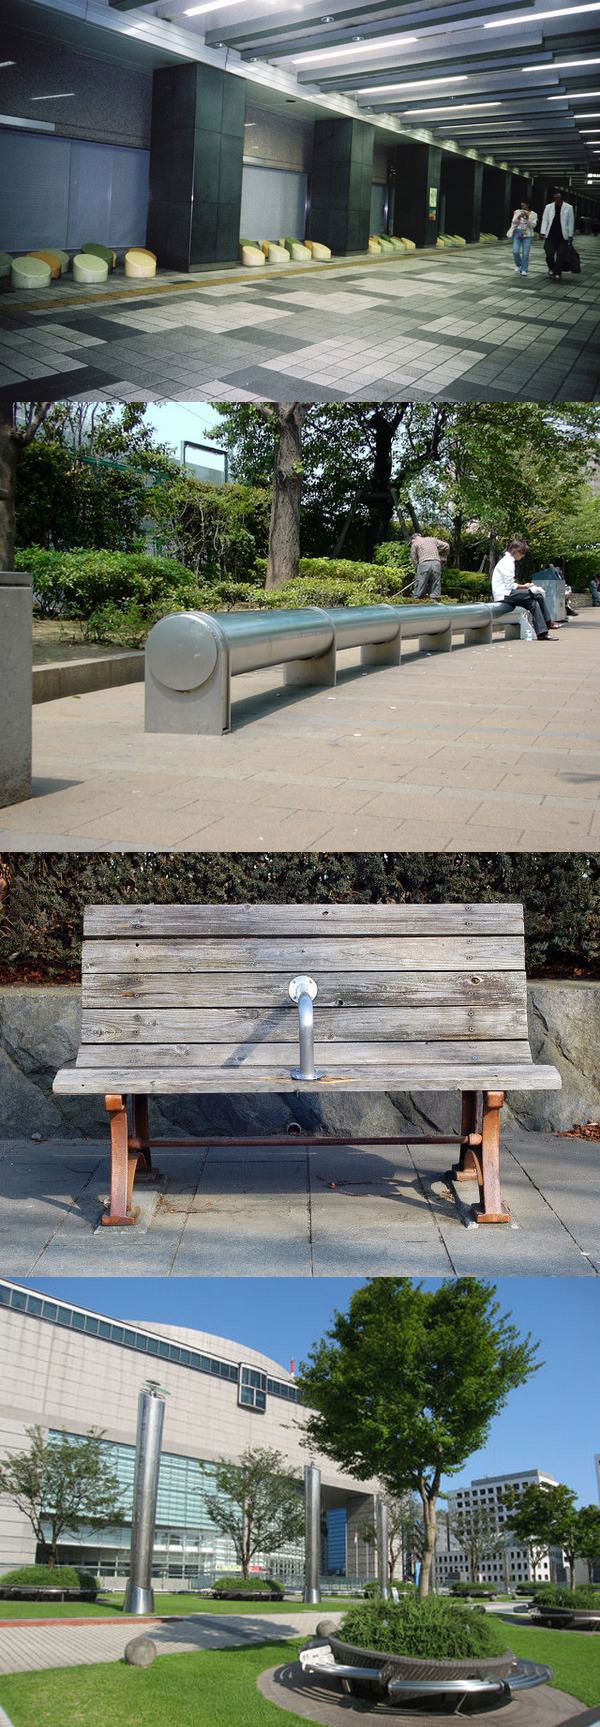 alternative ways to prevent homeless people from sleeping on public benches